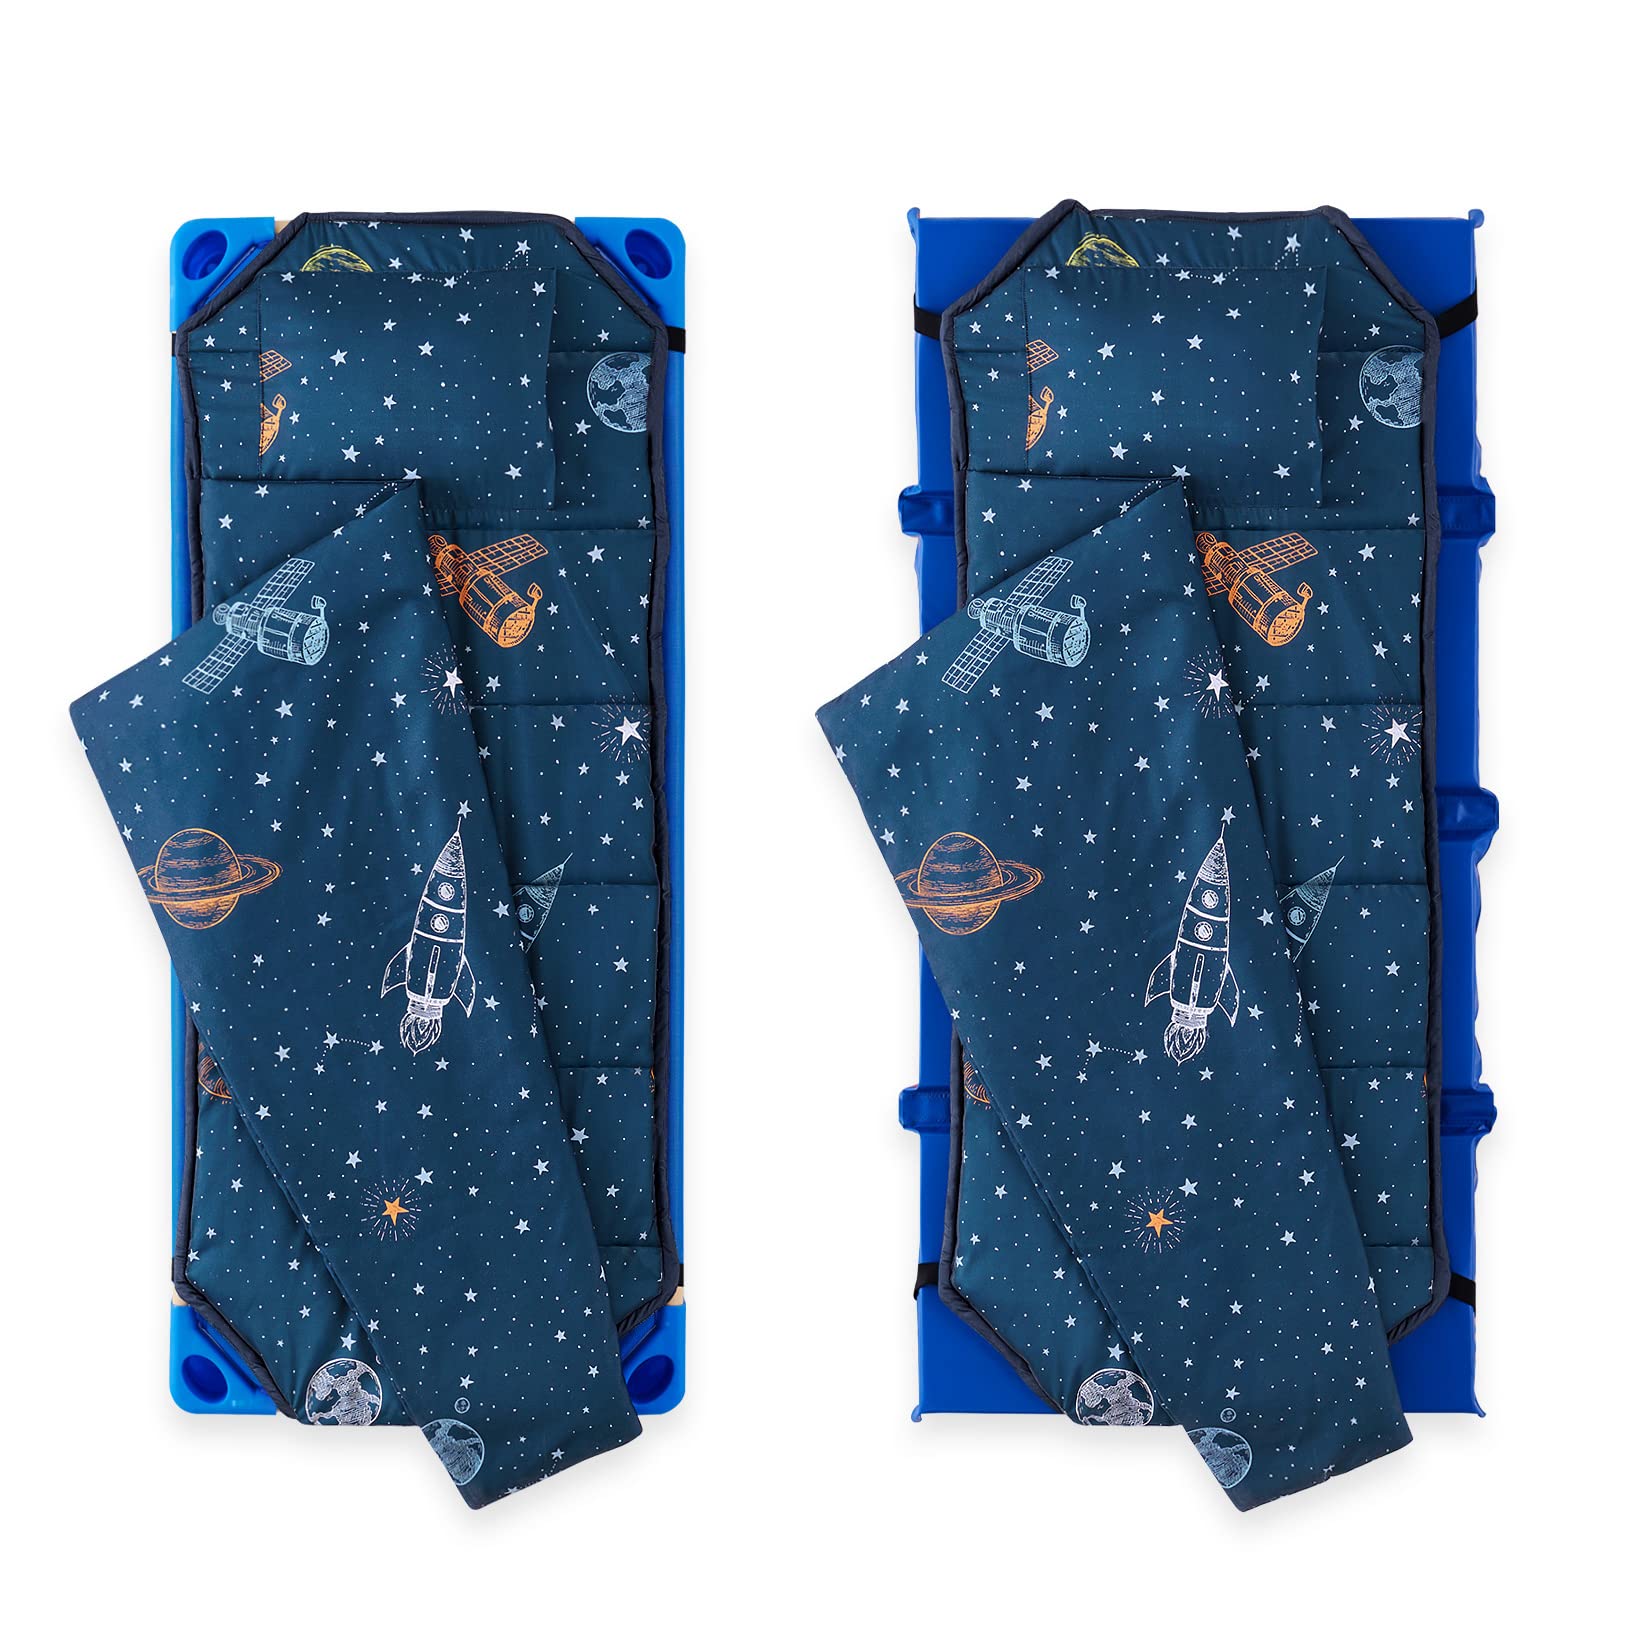 Wake In Cloud - Nap Mat with Pillow for Kids Toddler Boys Girls, Fit Preschool Daycare Sleeping Cot with Elastic Corner Straps, Rockets Stars Galaxy Space Planet on Navy Blue, 100% Soft Microfiber